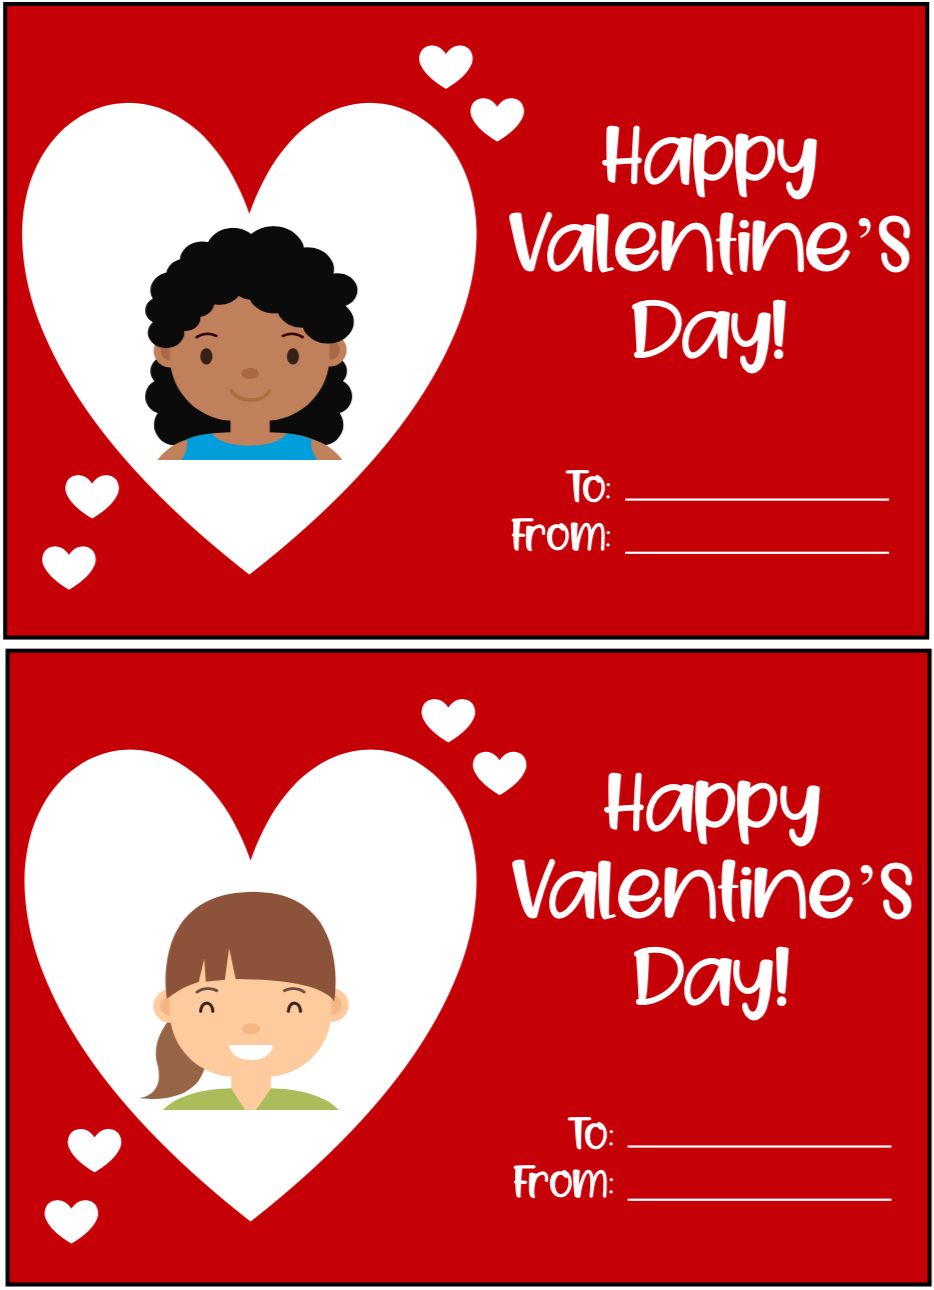 Free Printable Valentine’s Day Cards for School